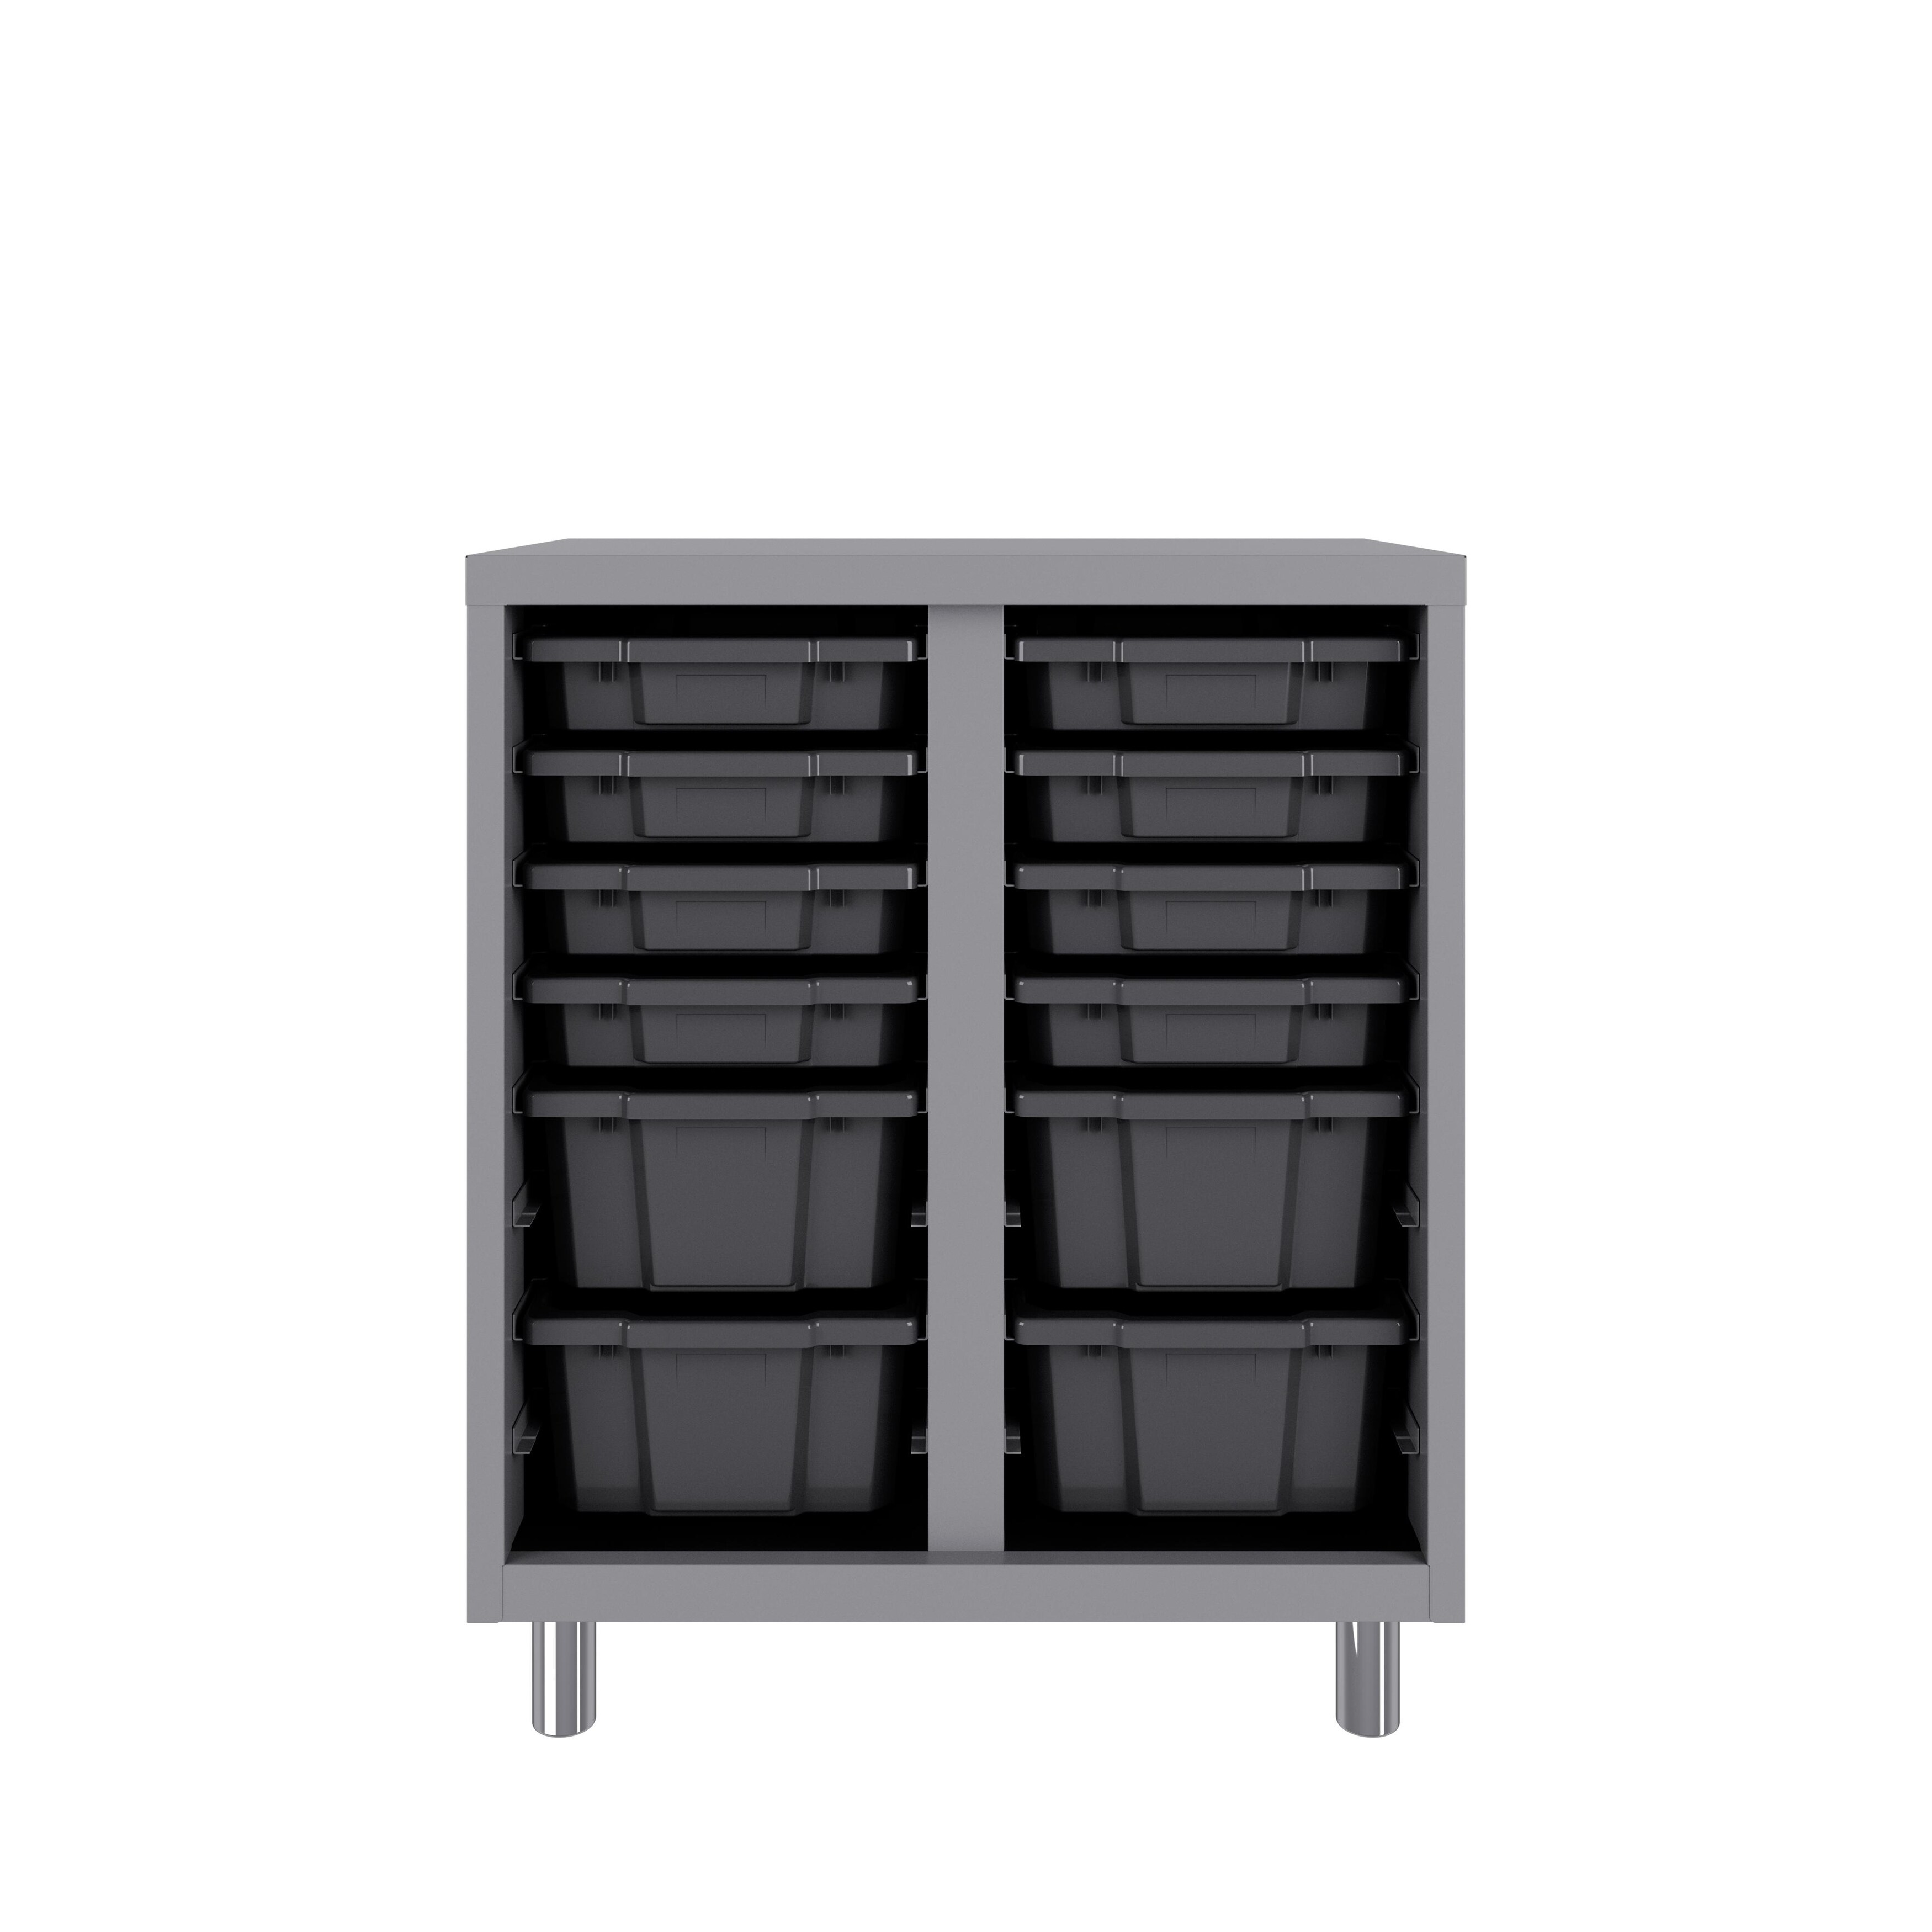 https://ak1.ostkcdn.com/images/products/is/images/direct/81d0af32ac73f3880b8063228a6c6f49eaed3c37/Space-Solutions-Bin-Storage-Cabinet-with-8-3%22-tote-bins-and-4-6%22-bins%2C-36x30x18%2C-Platinum-Graphite.jpg